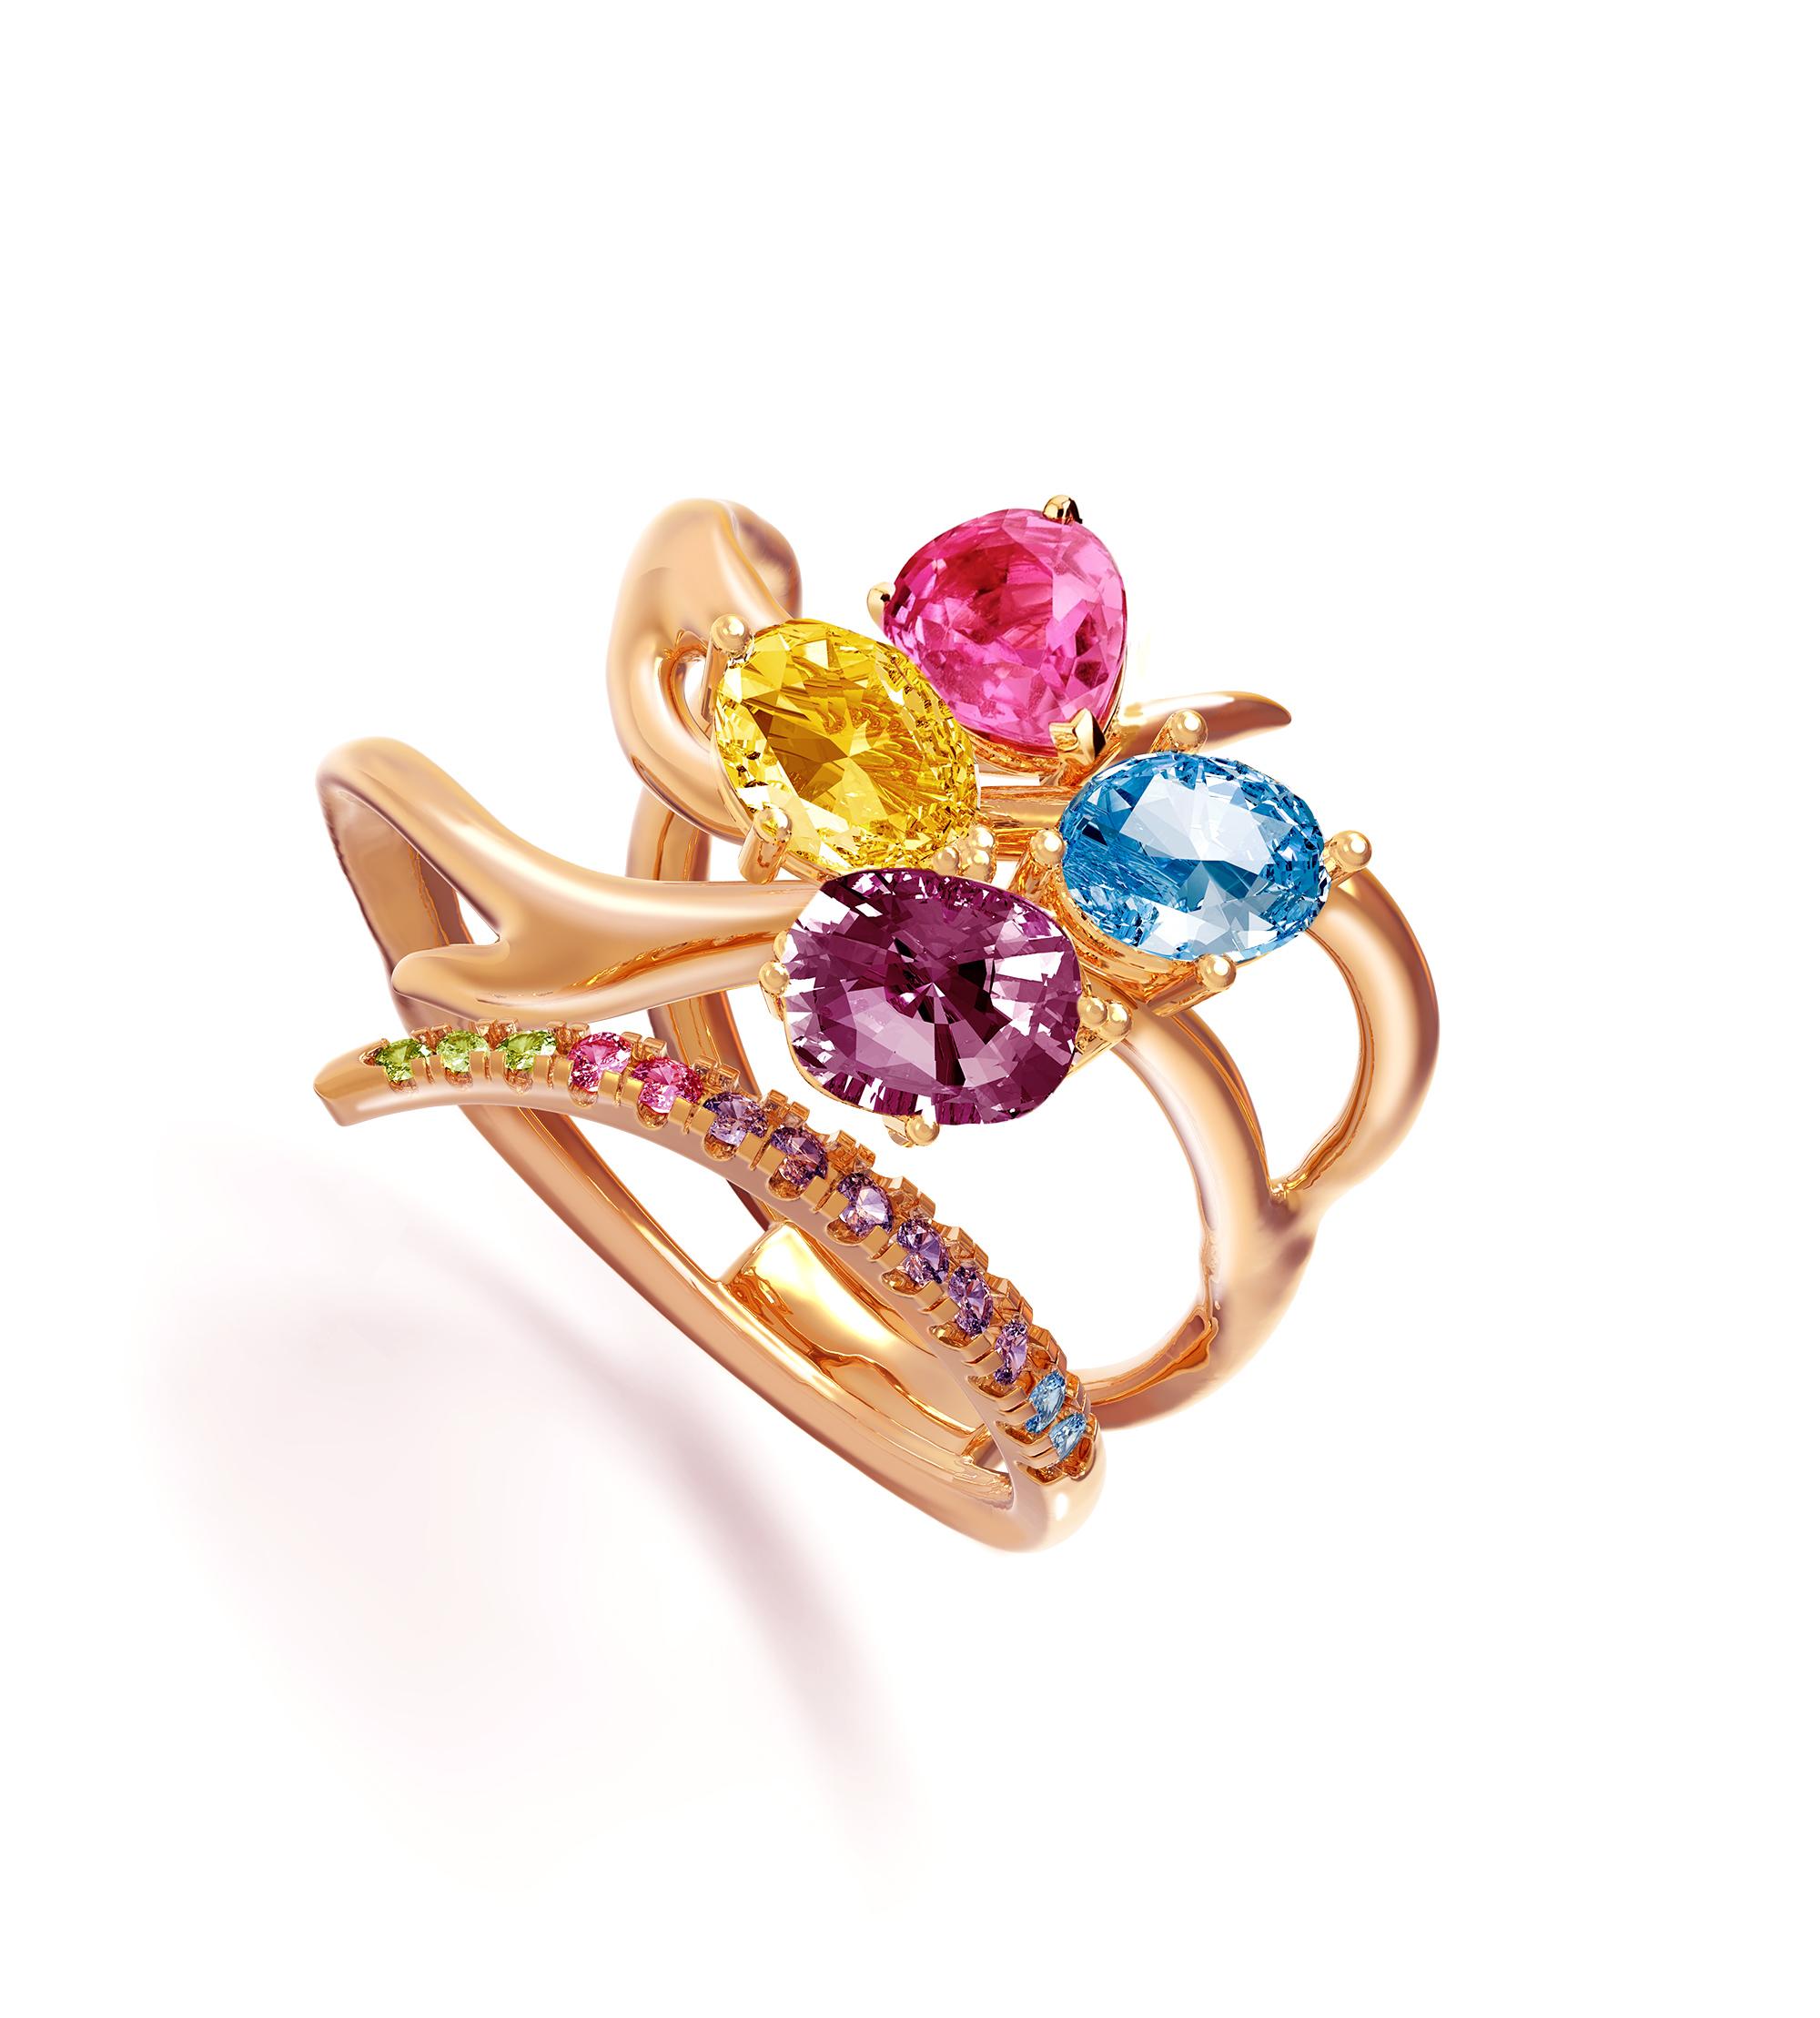 This Anime contemporary ring is made of 18 karat rose gold with your choice of natural gems, custom made to your preferences. The available gems include oval or pear cut pink sapphire, unheated and yellow sapphire in oval cut, blue Swiss topaz and